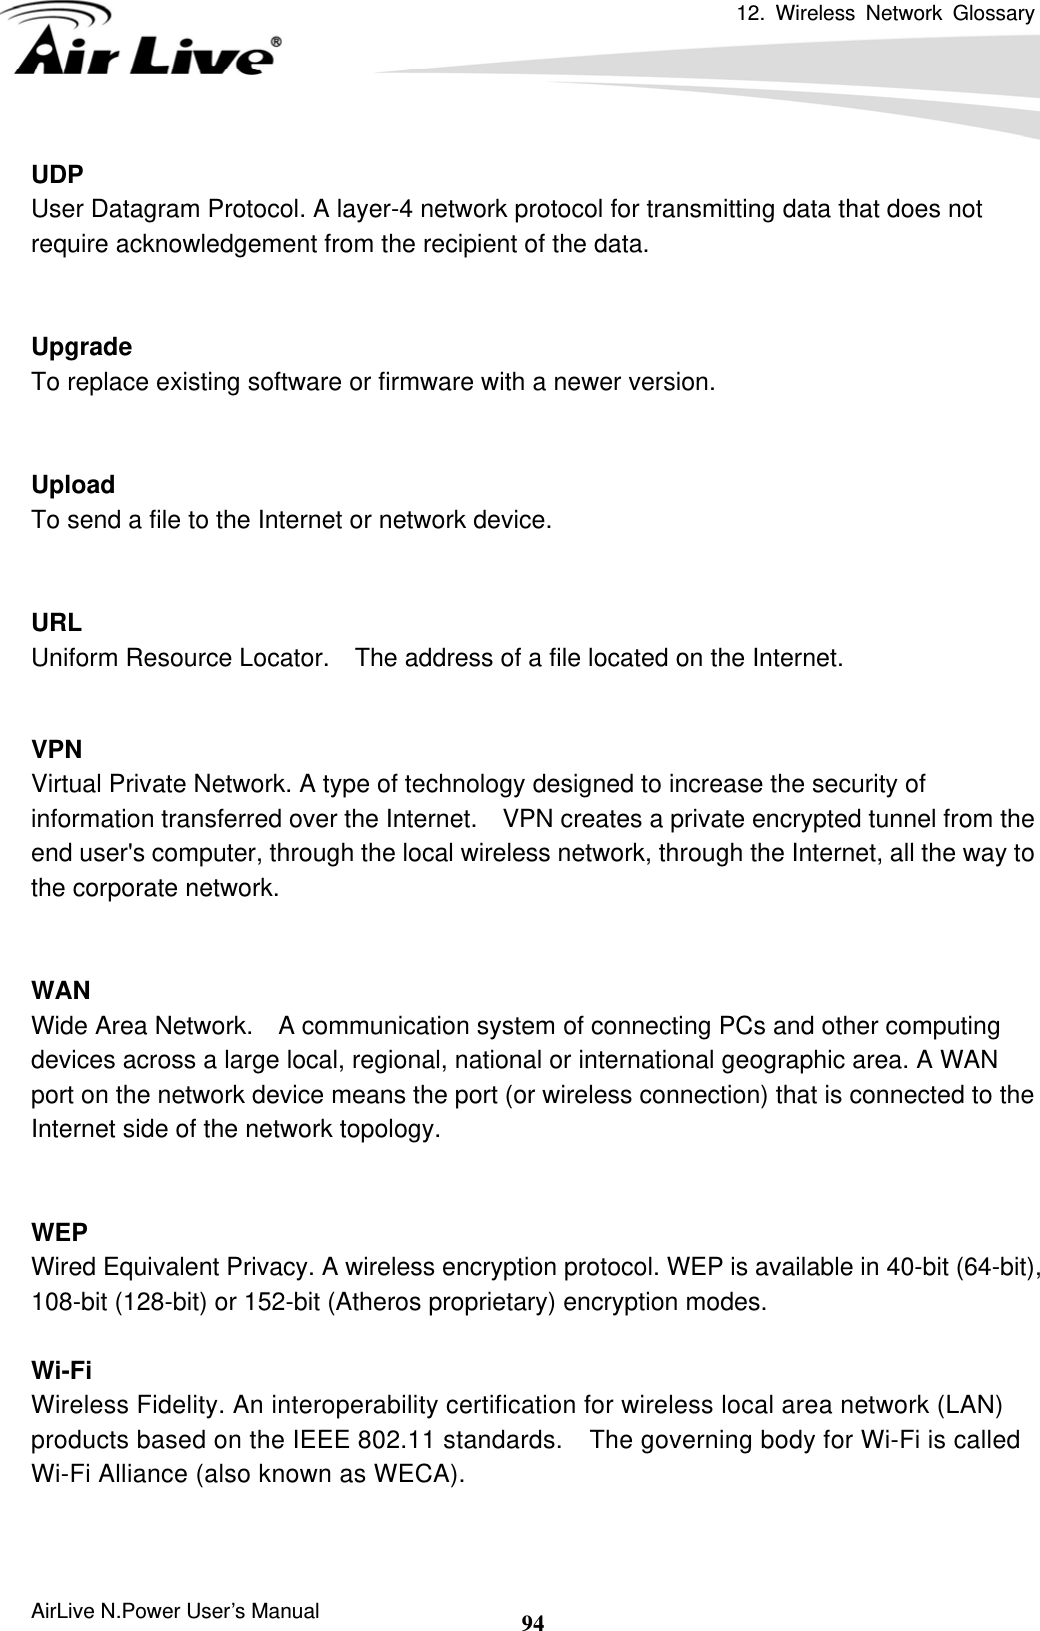 12. Wireless Network Glossary      AirLive N.Power User’s Manual  94UDP   User Datagram Protocol. A layer-4 network protocol for transmitting data that does not require acknowledgement from the recipient of the data.   Upgrade To replace existing software or firmware with a newer version.   Upload To send a file to the Internet or network device.   URL Uniform Resource Locator.    The address of a file located on the Internet.   VPN   Virtual Private Network. A type of technology designed to increase the security of information transferred over the Internet.    VPN creates a private encrypted tunnel from the end user&apos;s computer, through the local wireless network, through the Internet, all the way to the corporate network.   WAN Wide Area Network.    A communication system of connecting PCs and other computing devices across a large local, regional, national or international geographic area. A WAN port on the network device means the port (or wireless connection) that is connected to the Internet side of the network topology.   WEP   Wired Equivalent Privacy. A wireless encryption protocol. WEP is available in 40-bit (64-bit),   108-bit (128-bit) or 152-bit (Atheros proprietary) encryption modes.    Wi-Fi   Wireless Fidelity. An interoperability certification for wireless local area network (LAN) products based on the IEEE 802.11 standards.    The governing body for Wi-Fi is called Wi-Fi Alliance (also known as WECA).   